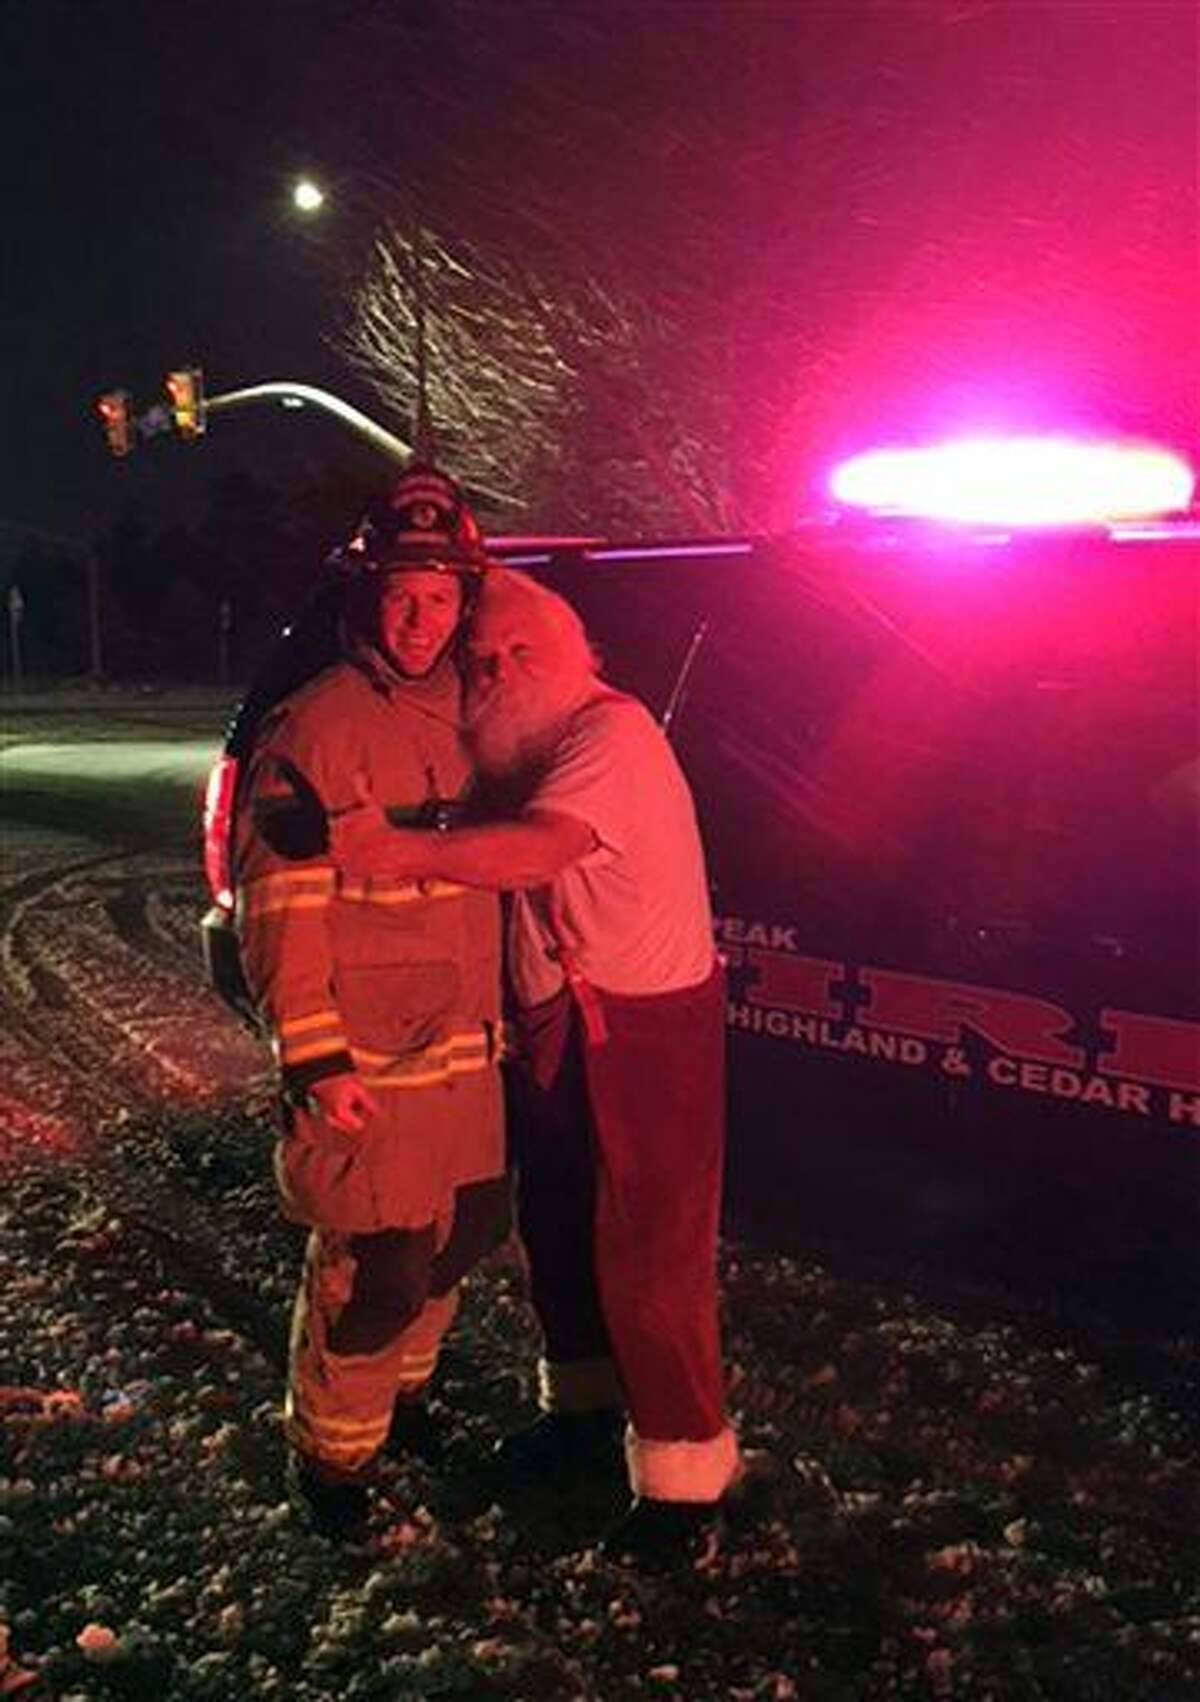 Steven Macey, right, a Santa-for-hire, from Orem, Utah gives a big hug to firefighter Capt. Danny Campbell after fire crews extinguished a fire on Macey’s vehicle on Friday, Dec. 25, 2015 near Alpine, Utah. Firefighters called to the car fire in the Utah suburb got a big surprise early Christmas morning when they discovered the stranded driver turned out to be Santa Claus on the way to deliver presents. (Lt. Dustin Mitchell/Lone Peak Fire District via AP)